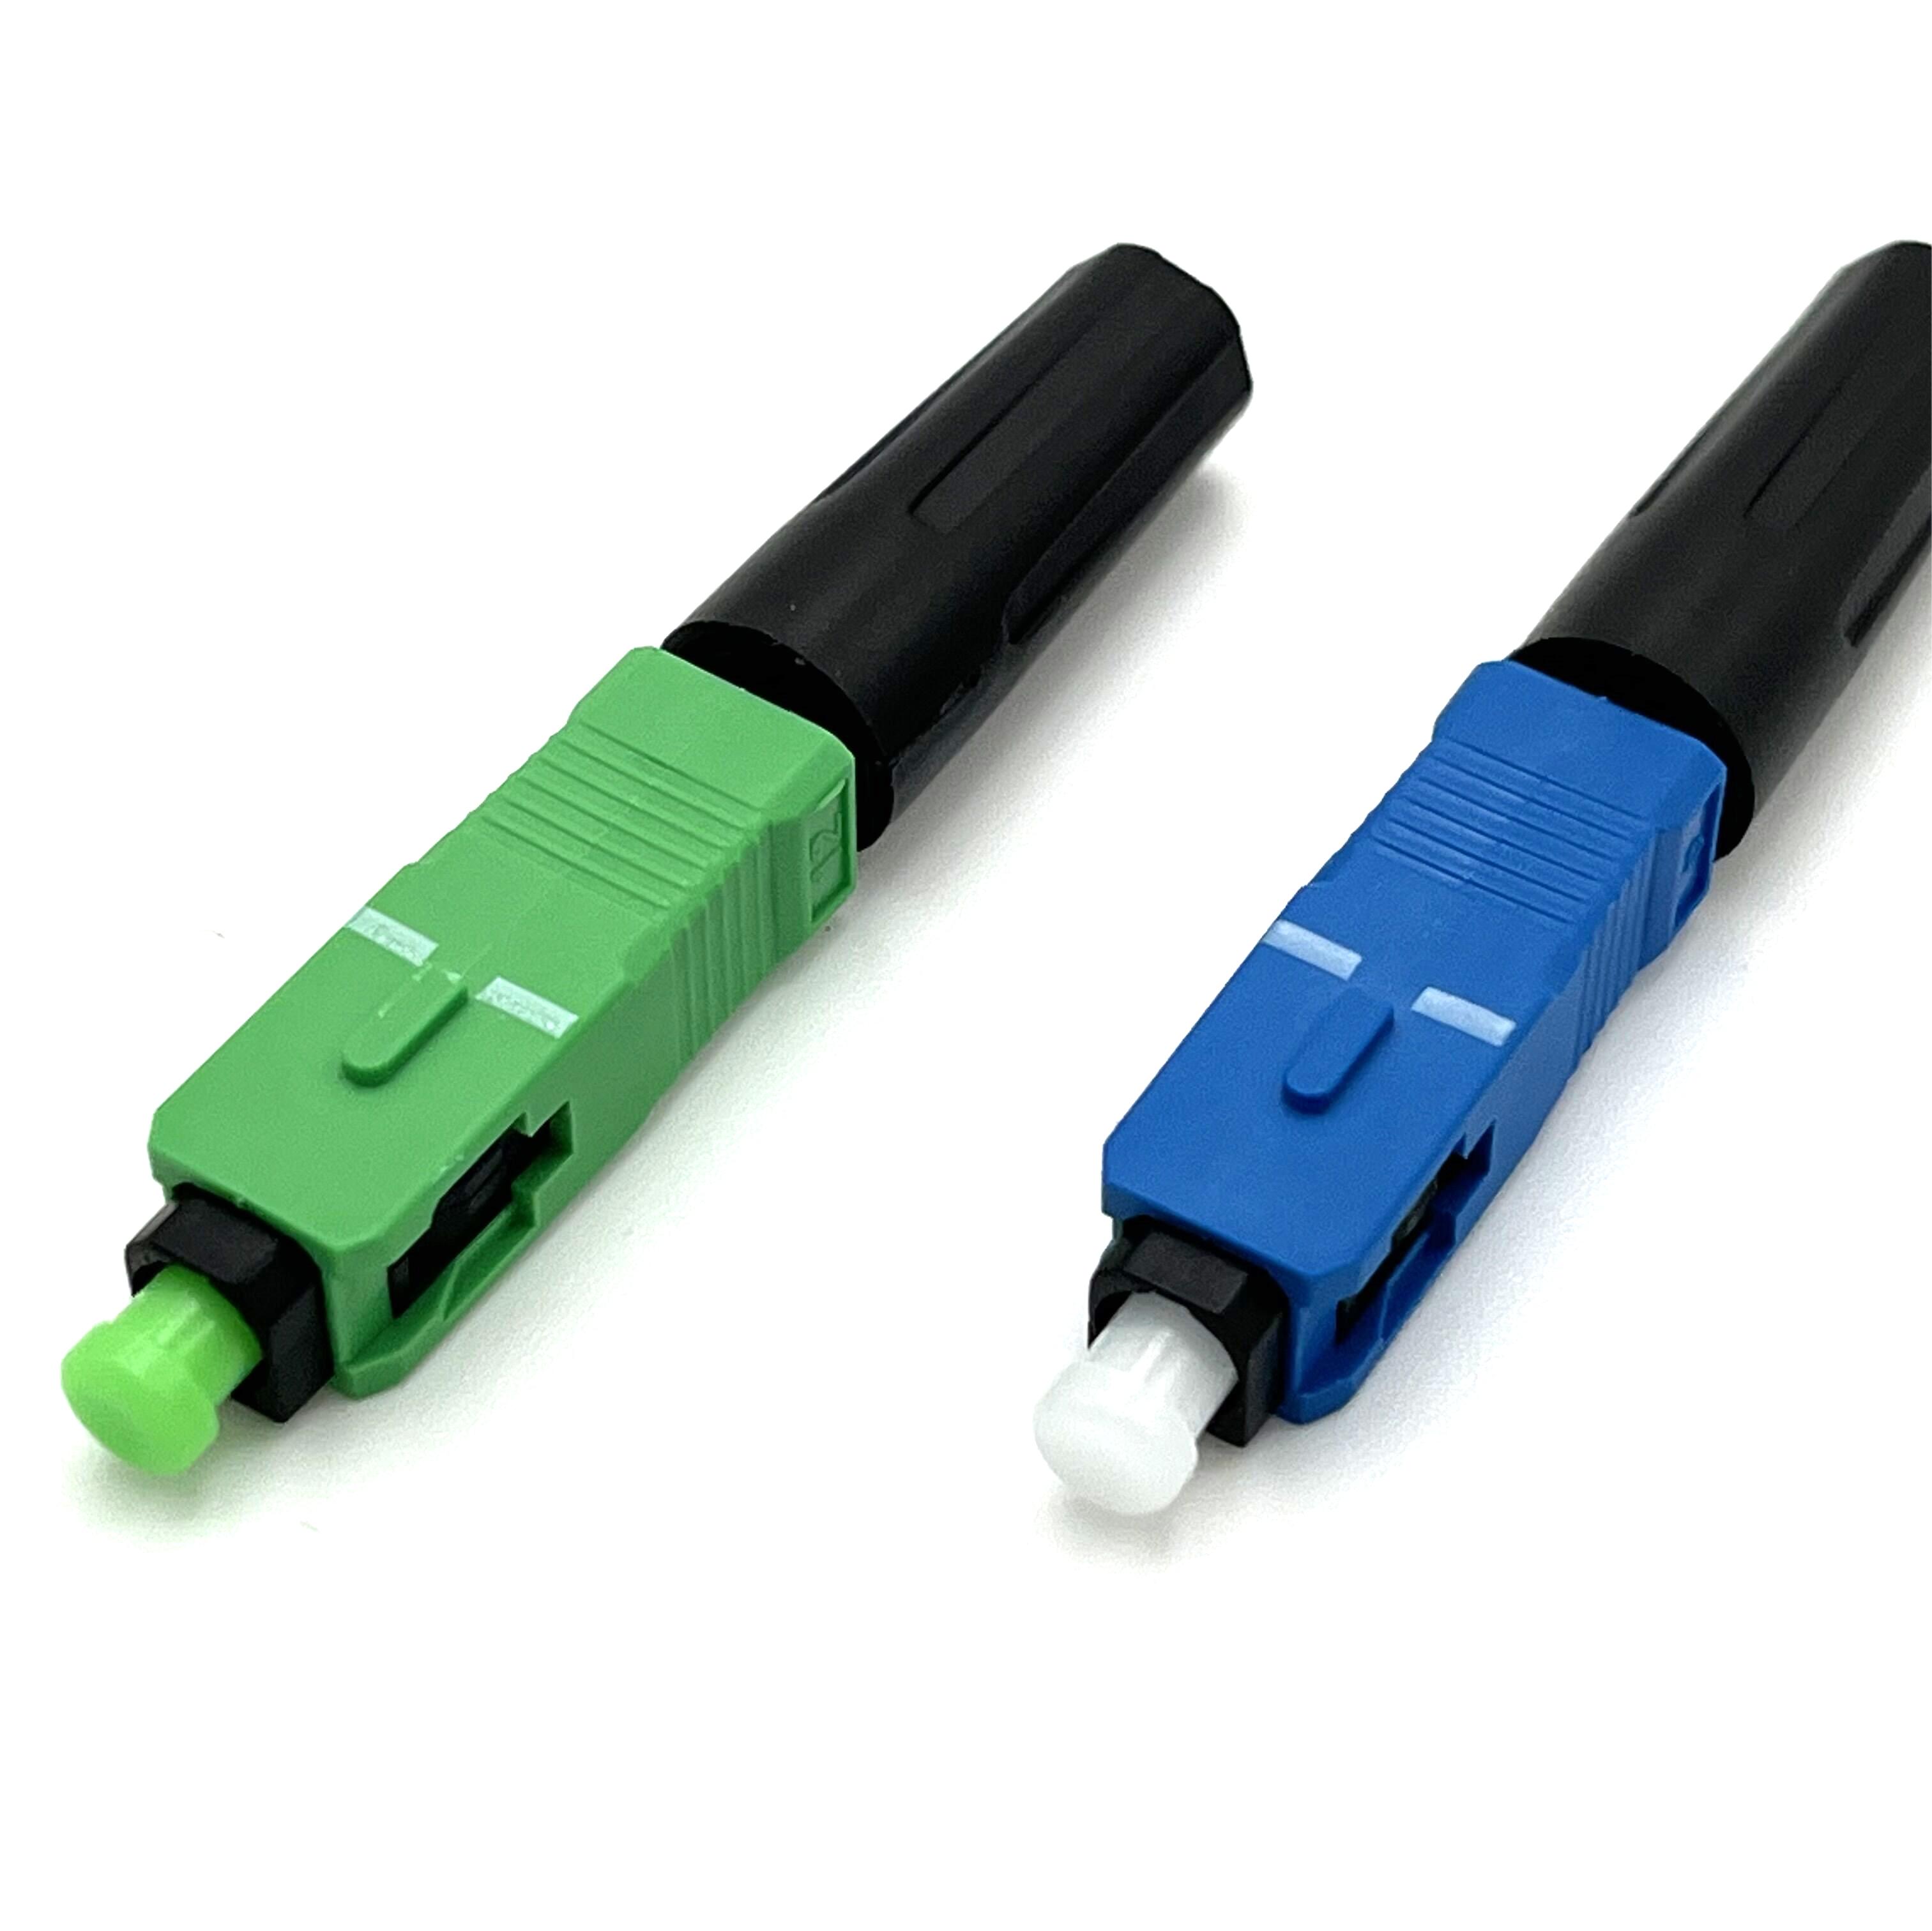 02 TYPE FAST FIELD CONNECTOR